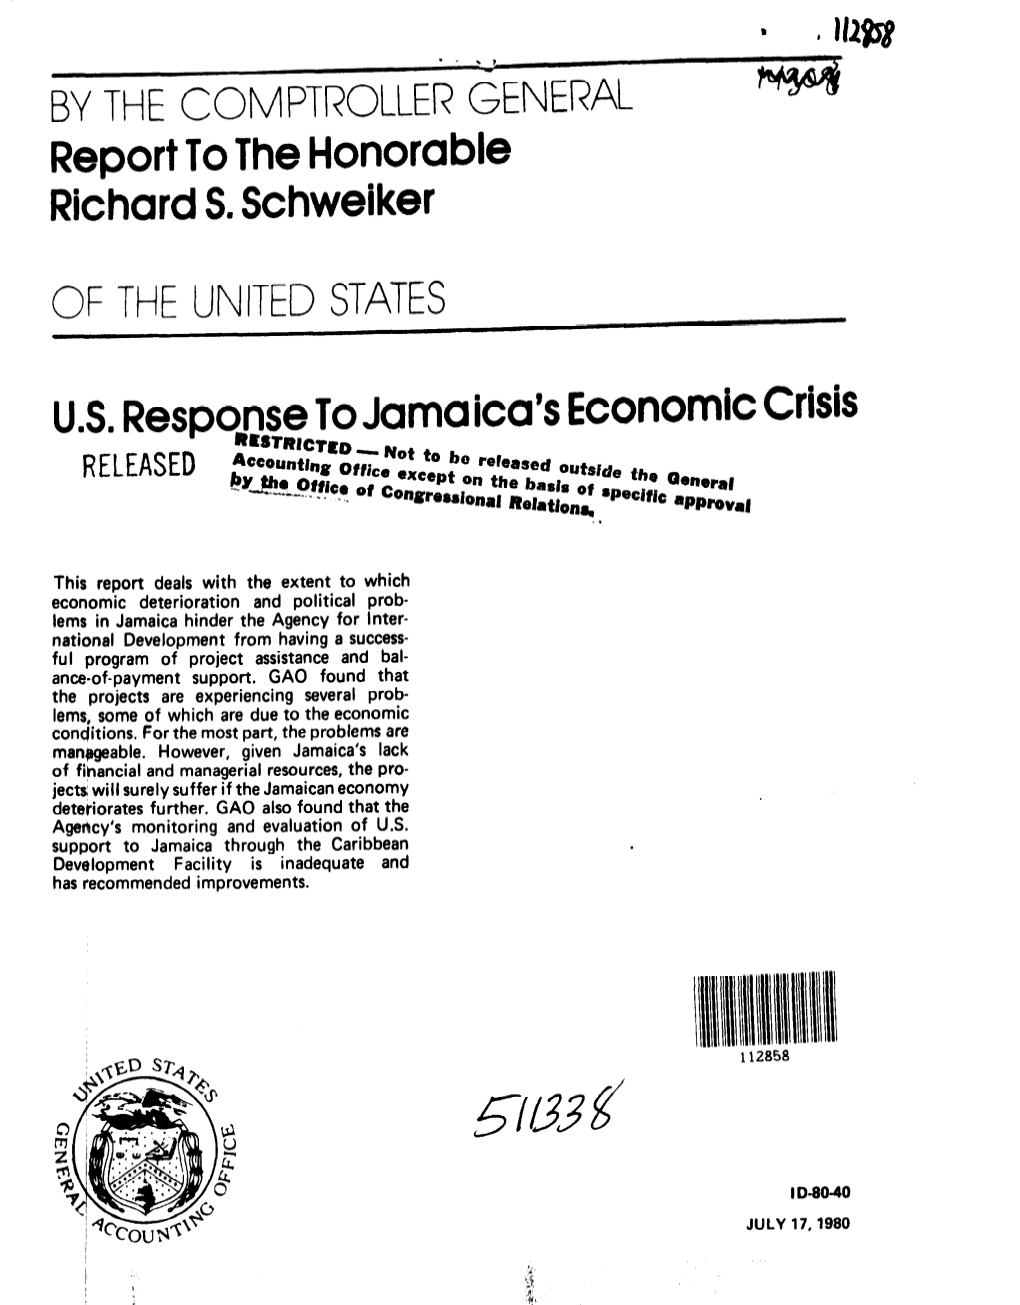 Report to the Honorable Richard S. Schweiker